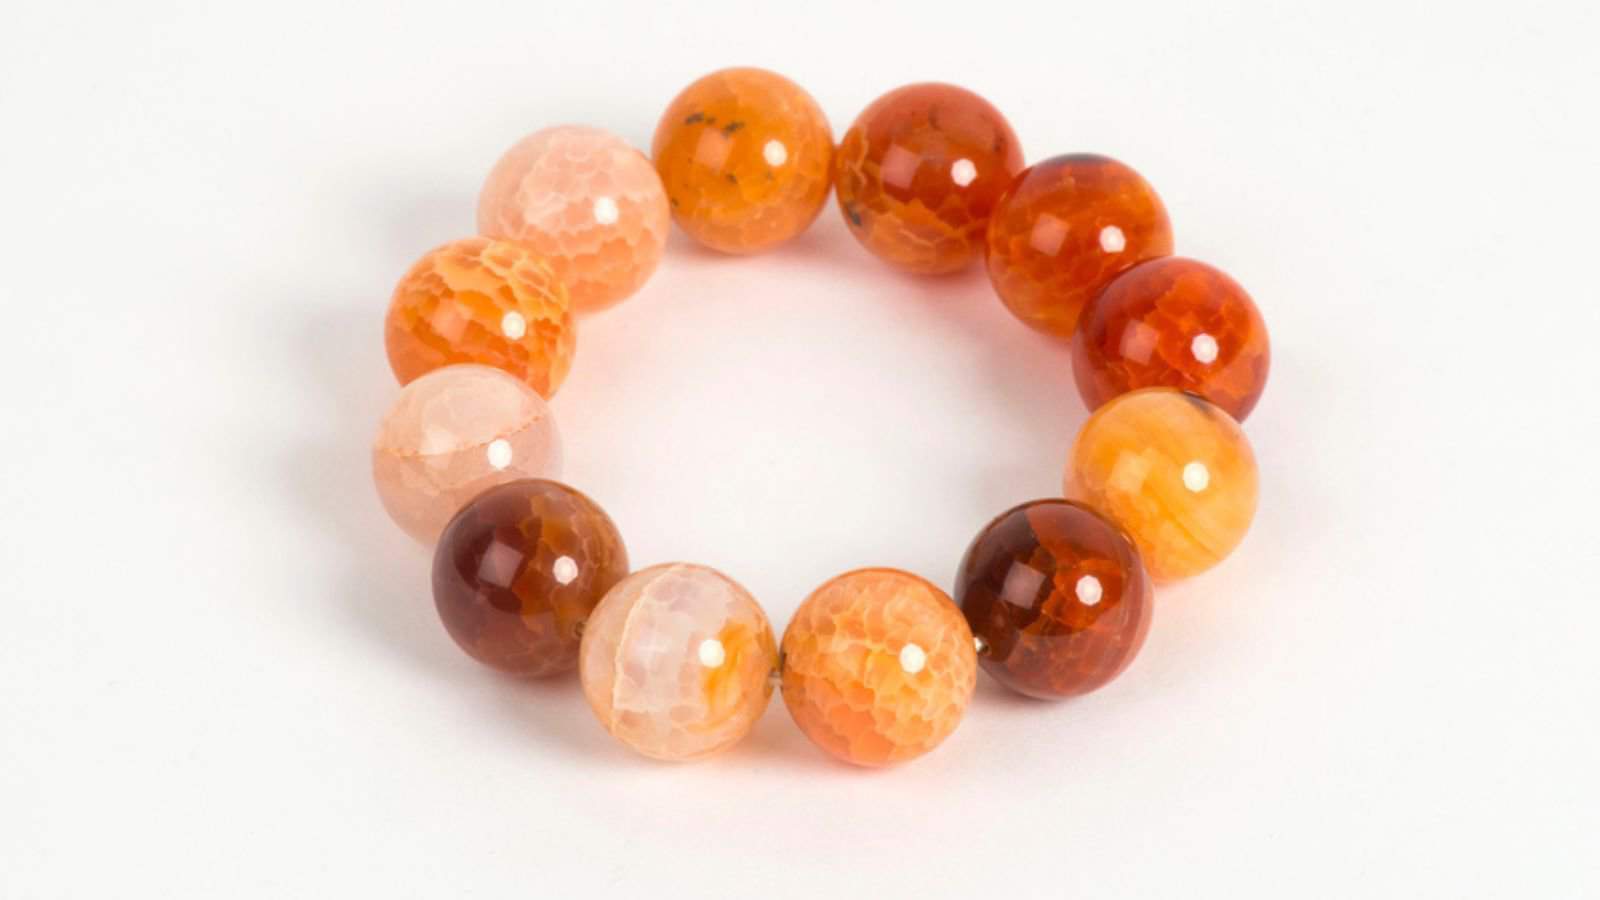 Bracelet made of natural stones on a white background